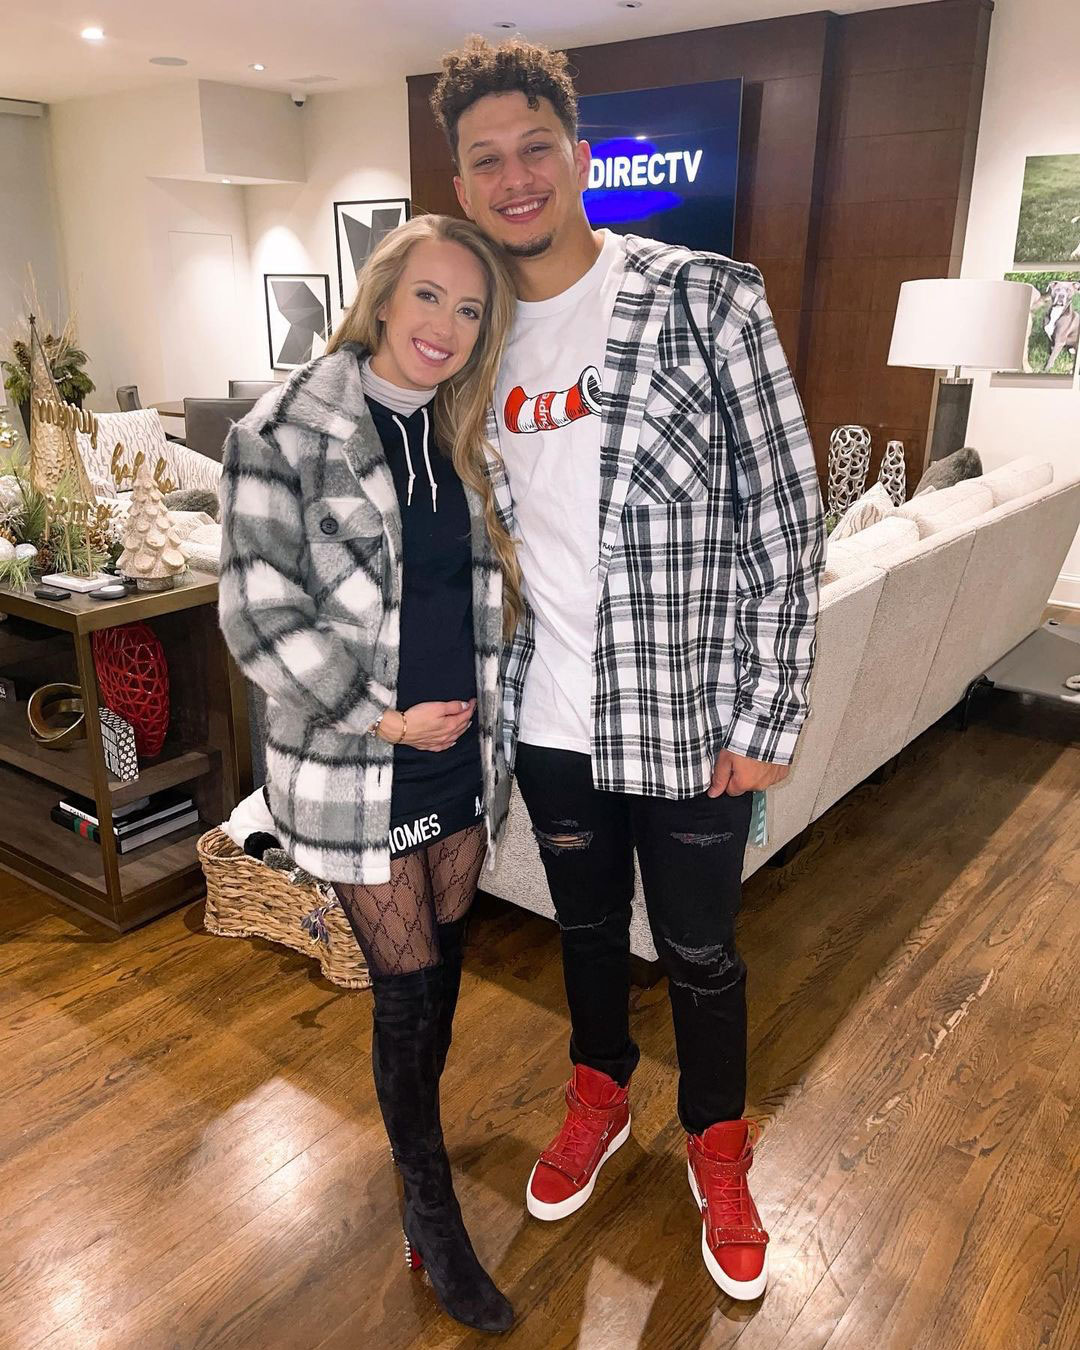 September 2020 Announced They Are Expecting Baby Brittany Matthews Instagram Patrick Mahomes and Brittany Matthews Relationship Timeline